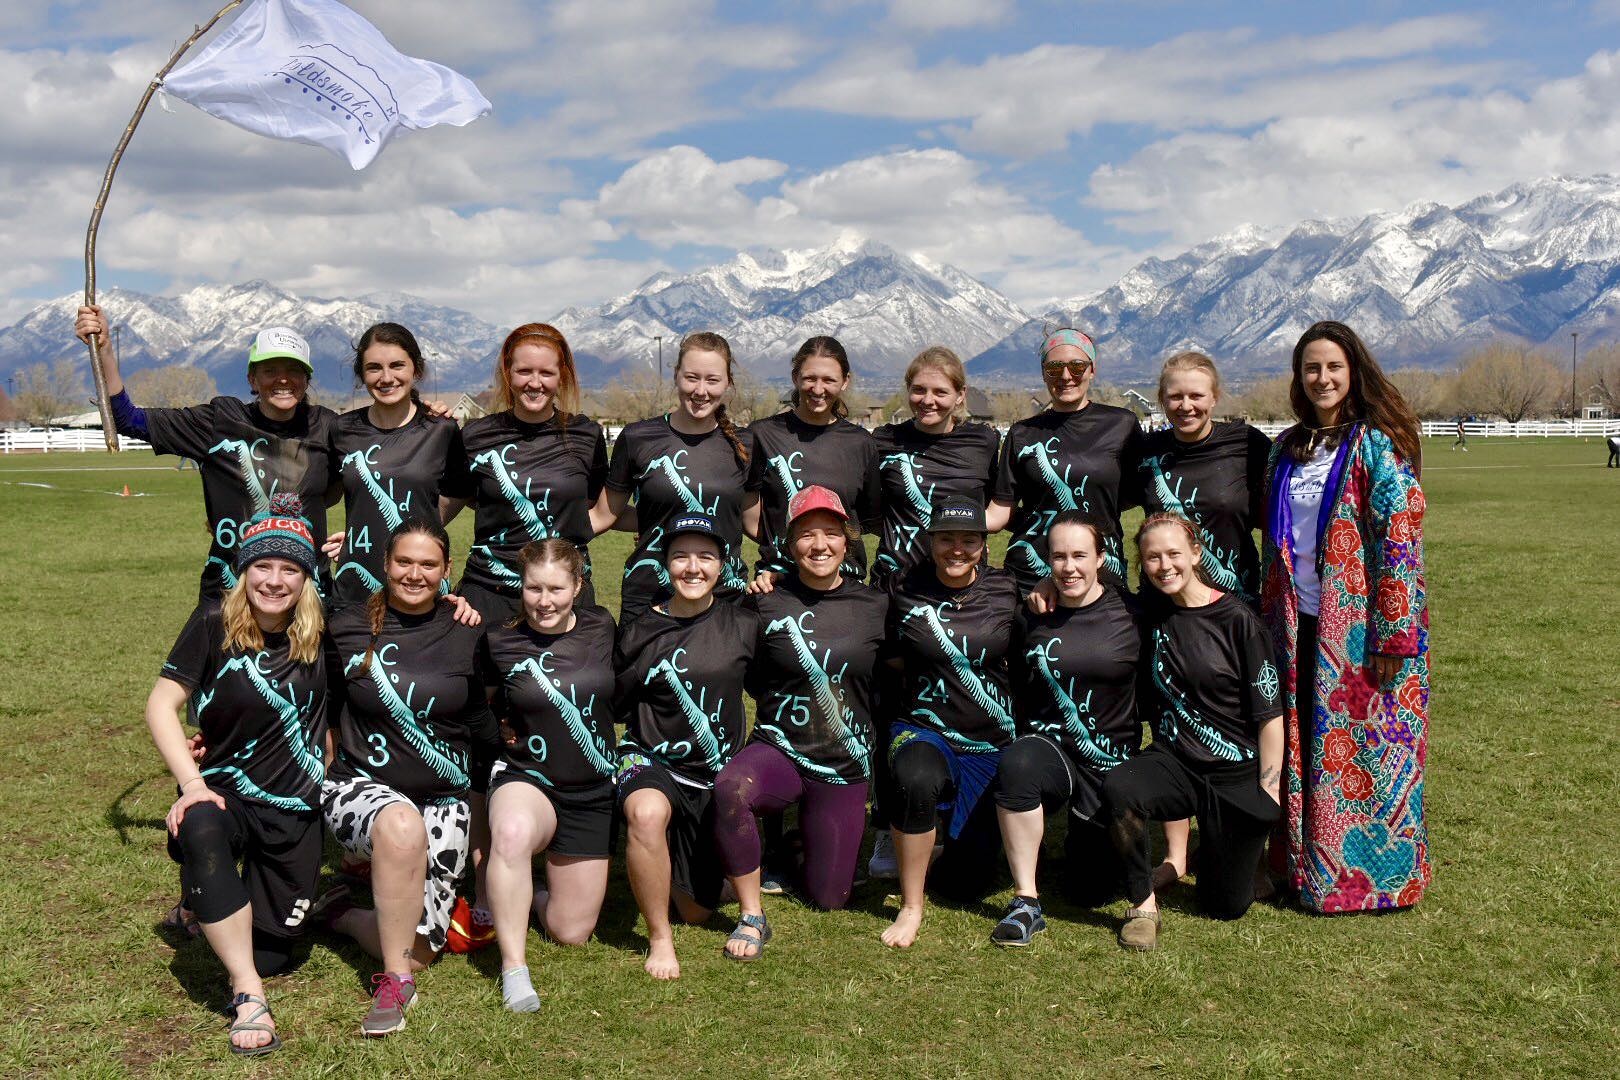 womens ultimate frisbee team photo